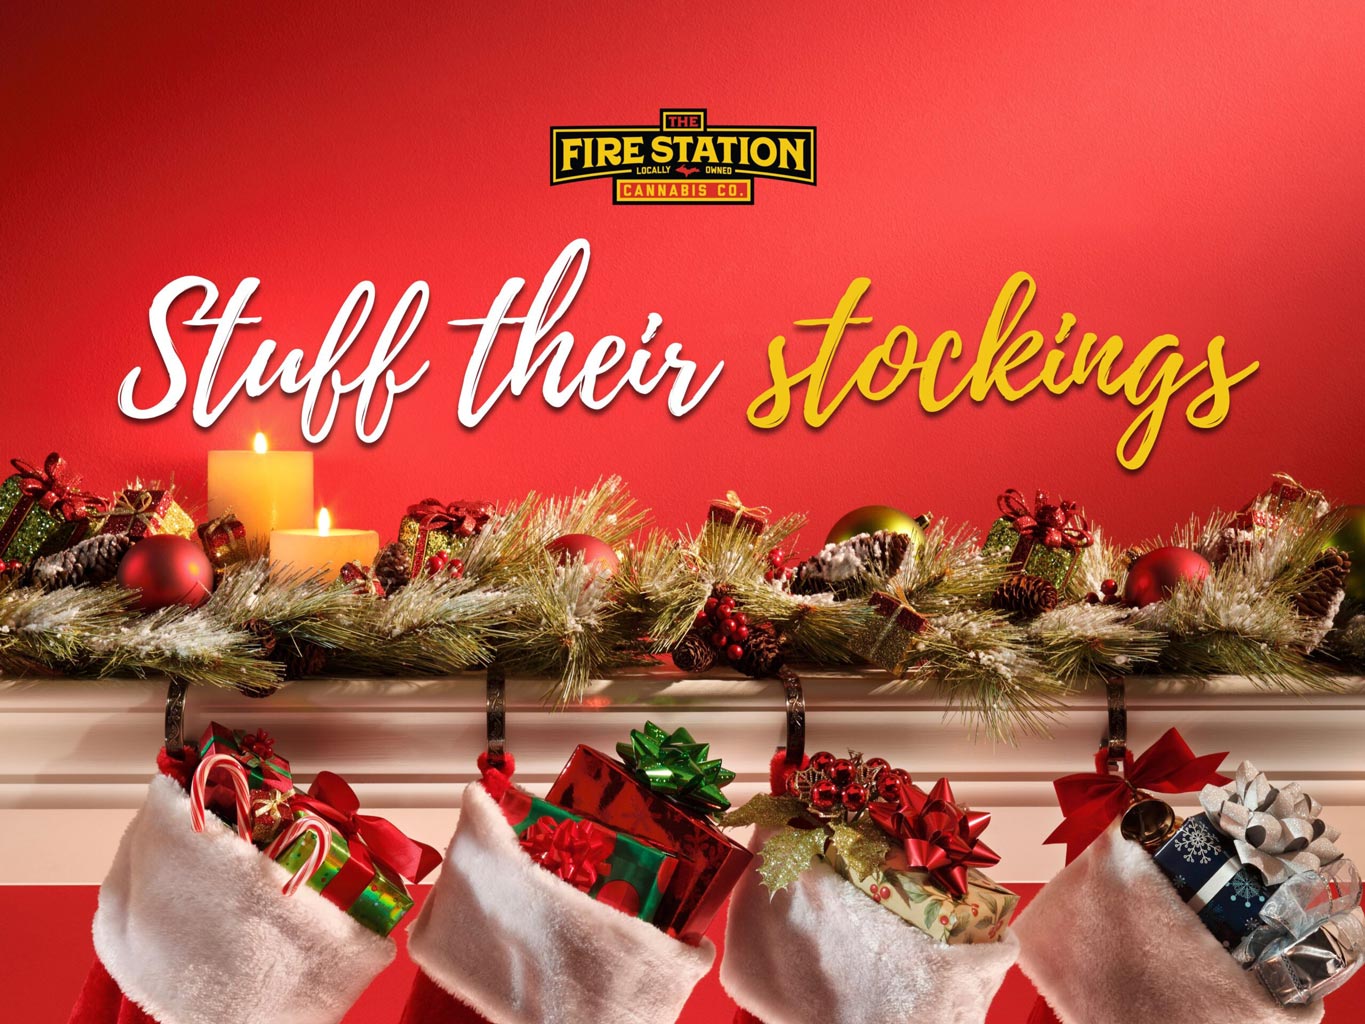 Stocking stuffer ideas at The Fire Station Cannabis Co., a Michigan-based cannabis dispensary